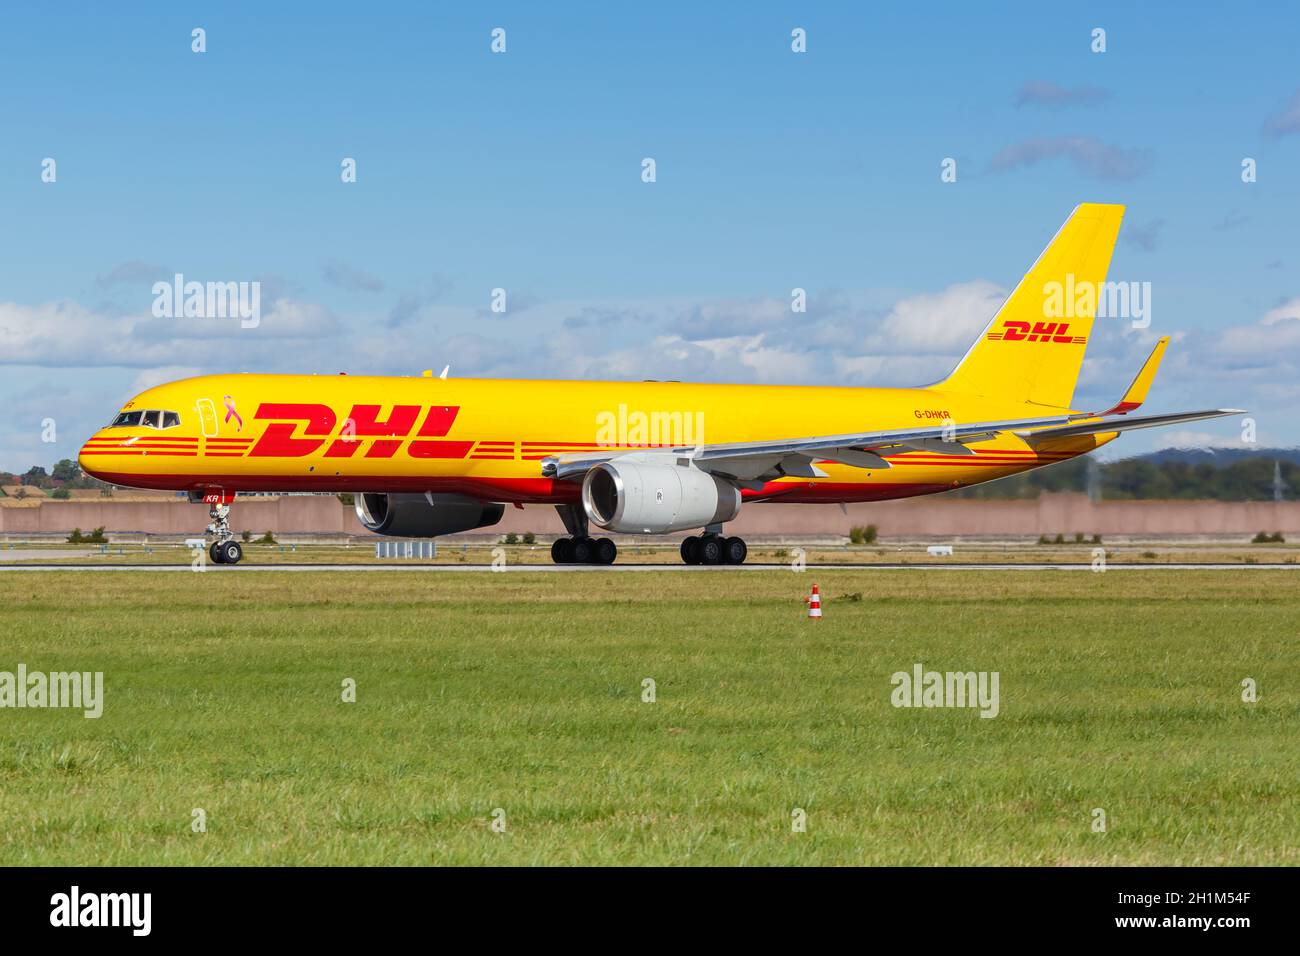 Stuttgart, Germany - October 4, 2020: DHL Boeing 757-200(PCF) airplane at Stuttgart Airport in Germany. Boeing is an American aircraft manufacturer he Stock Photo